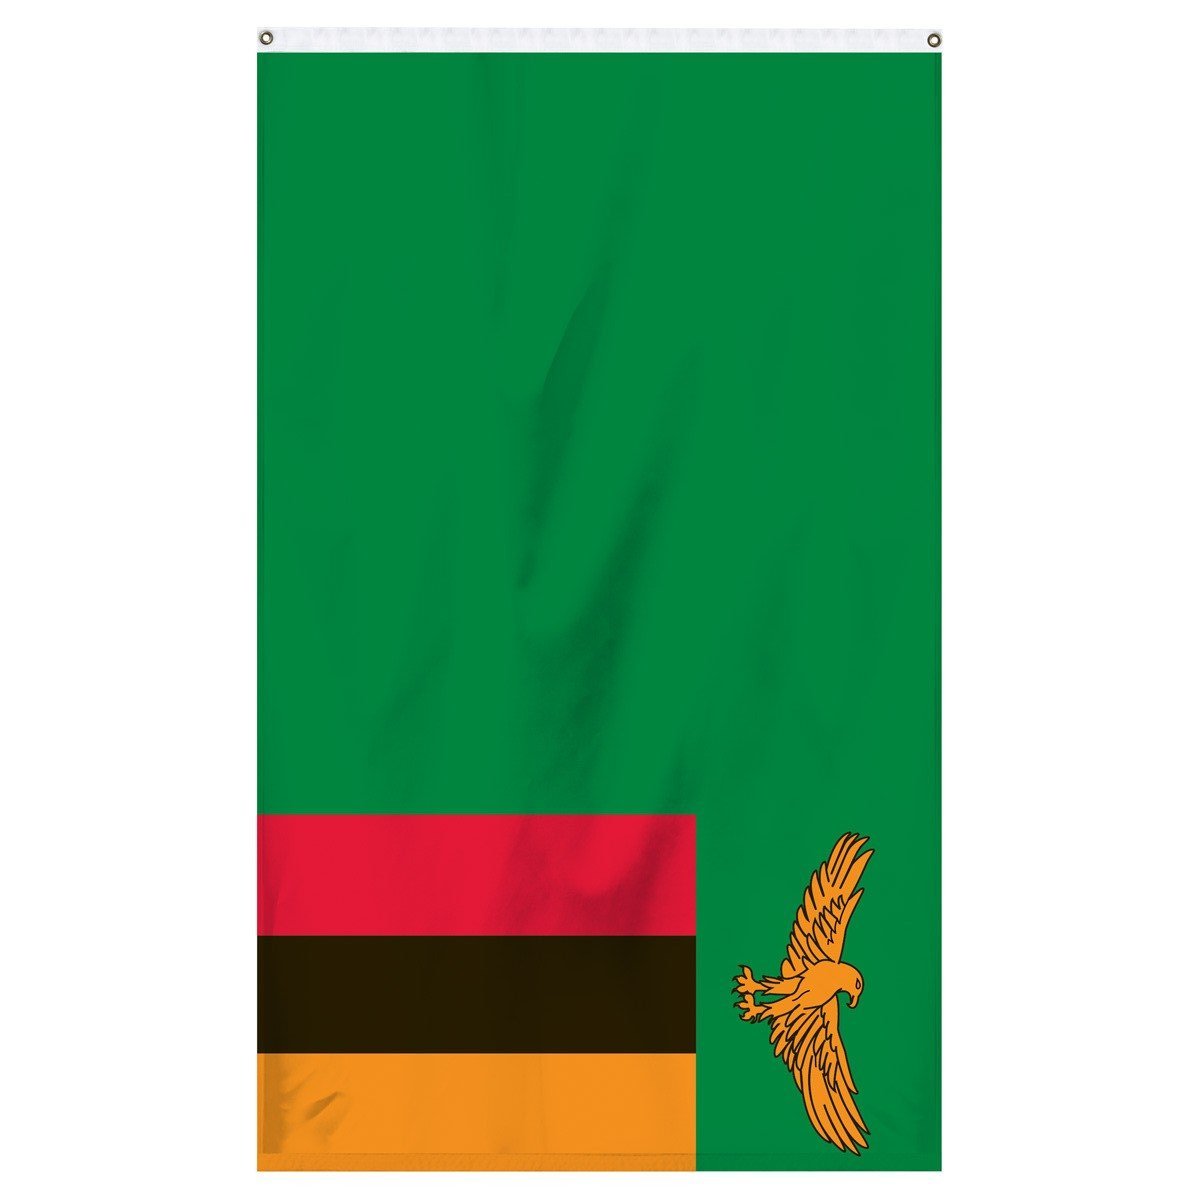 Zambia National flag for sale to buy online from Atlantic Flag and Pole, an American company. A green field with an orange coloured eagle in flight over a rectangular block of three vertical stripes colored from left to right in red, black and orange.